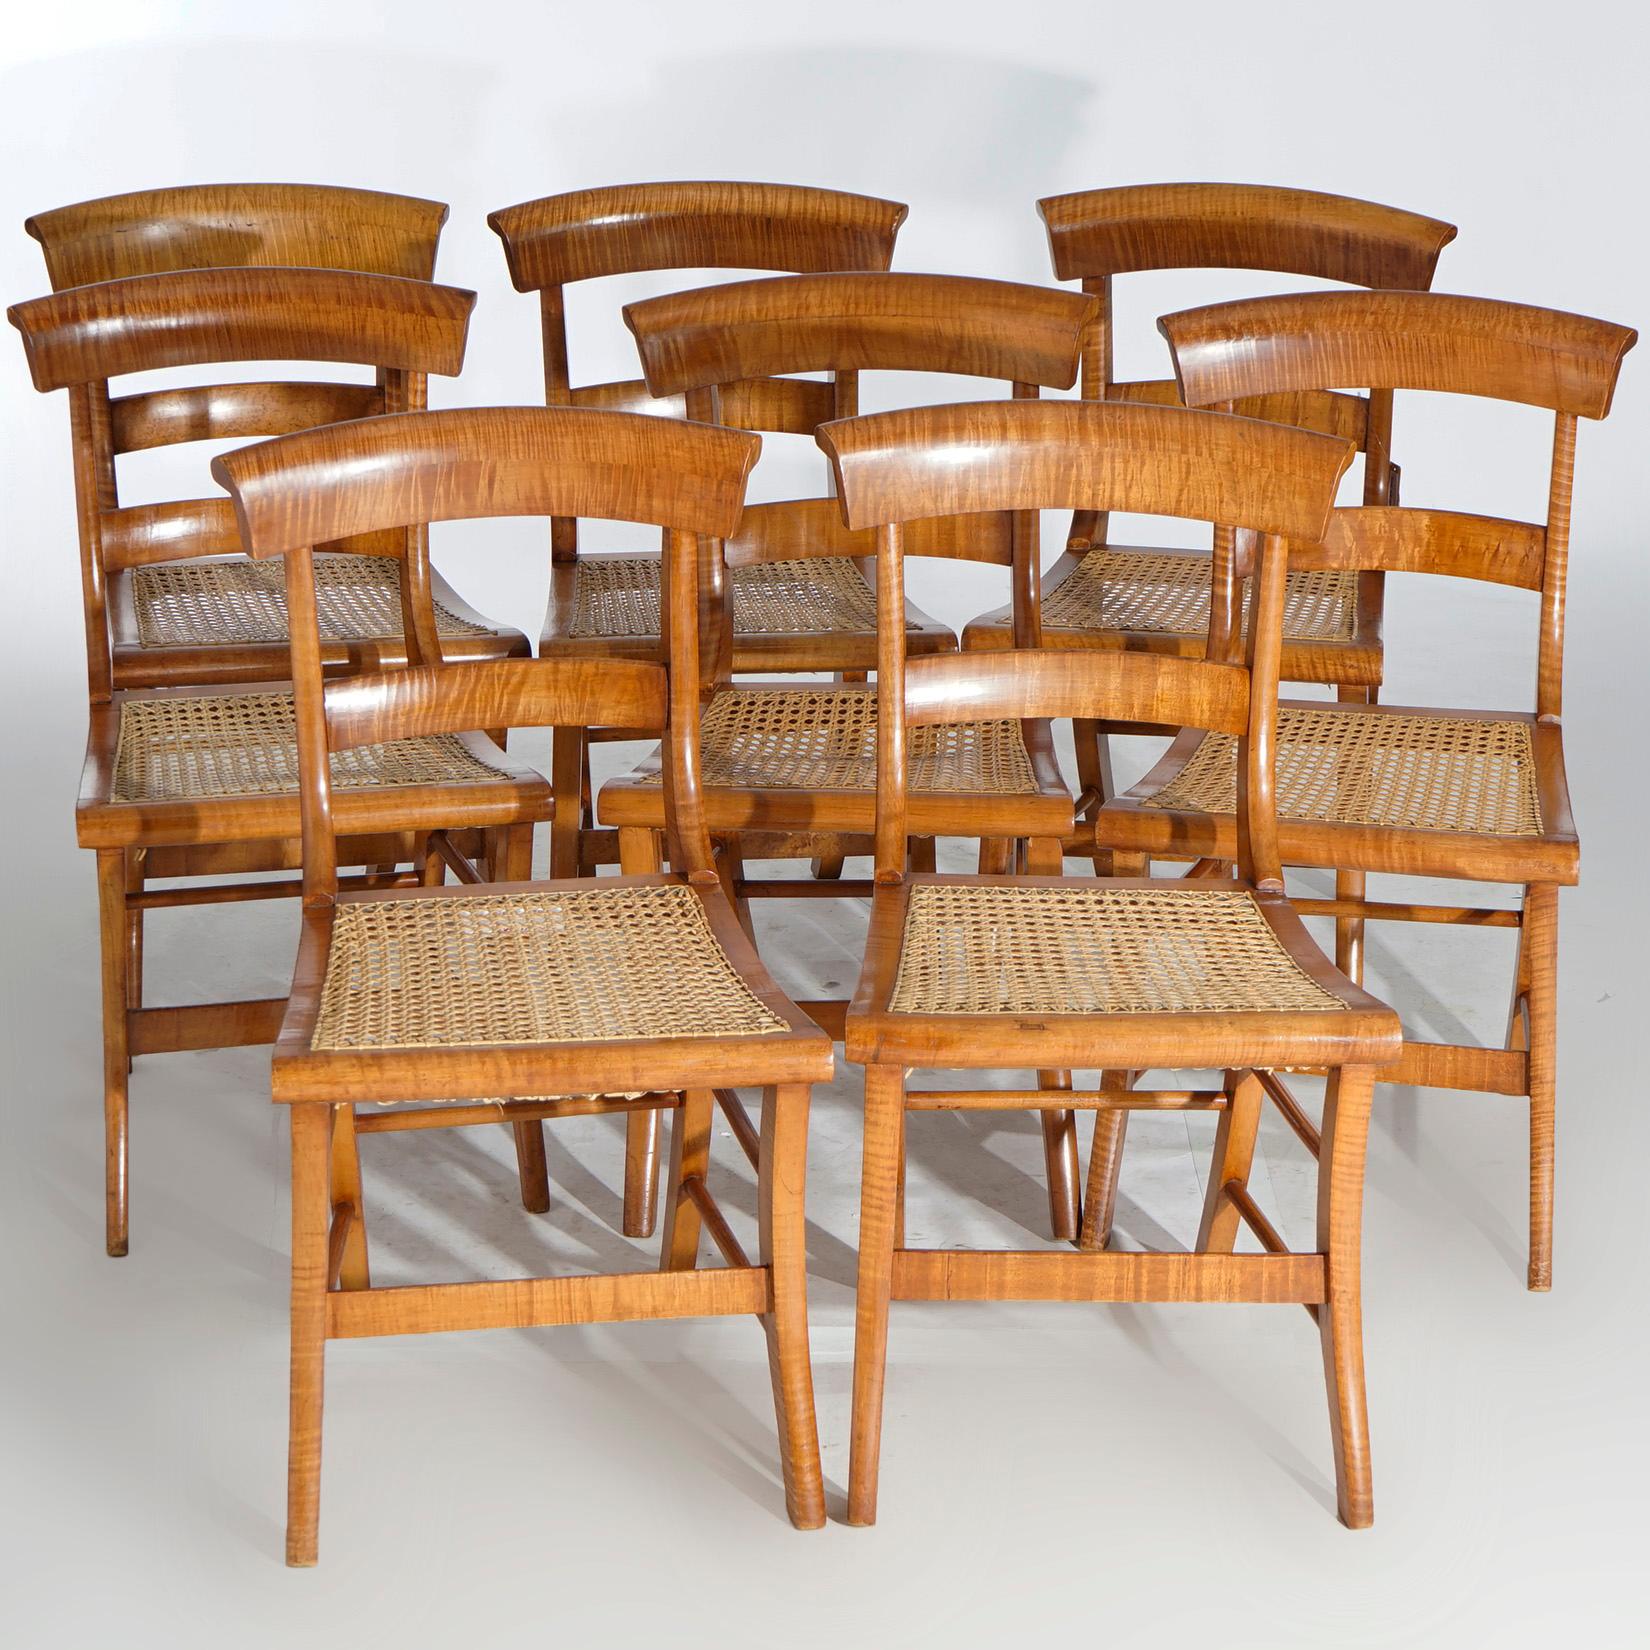 A set of eight antique Federal dining chairs offer tiger maple construction with stylized scroll form rail over slat back, caned seats and splay legs, c1830.

Measures- 33.5''H x 17.5''W x 20''D.